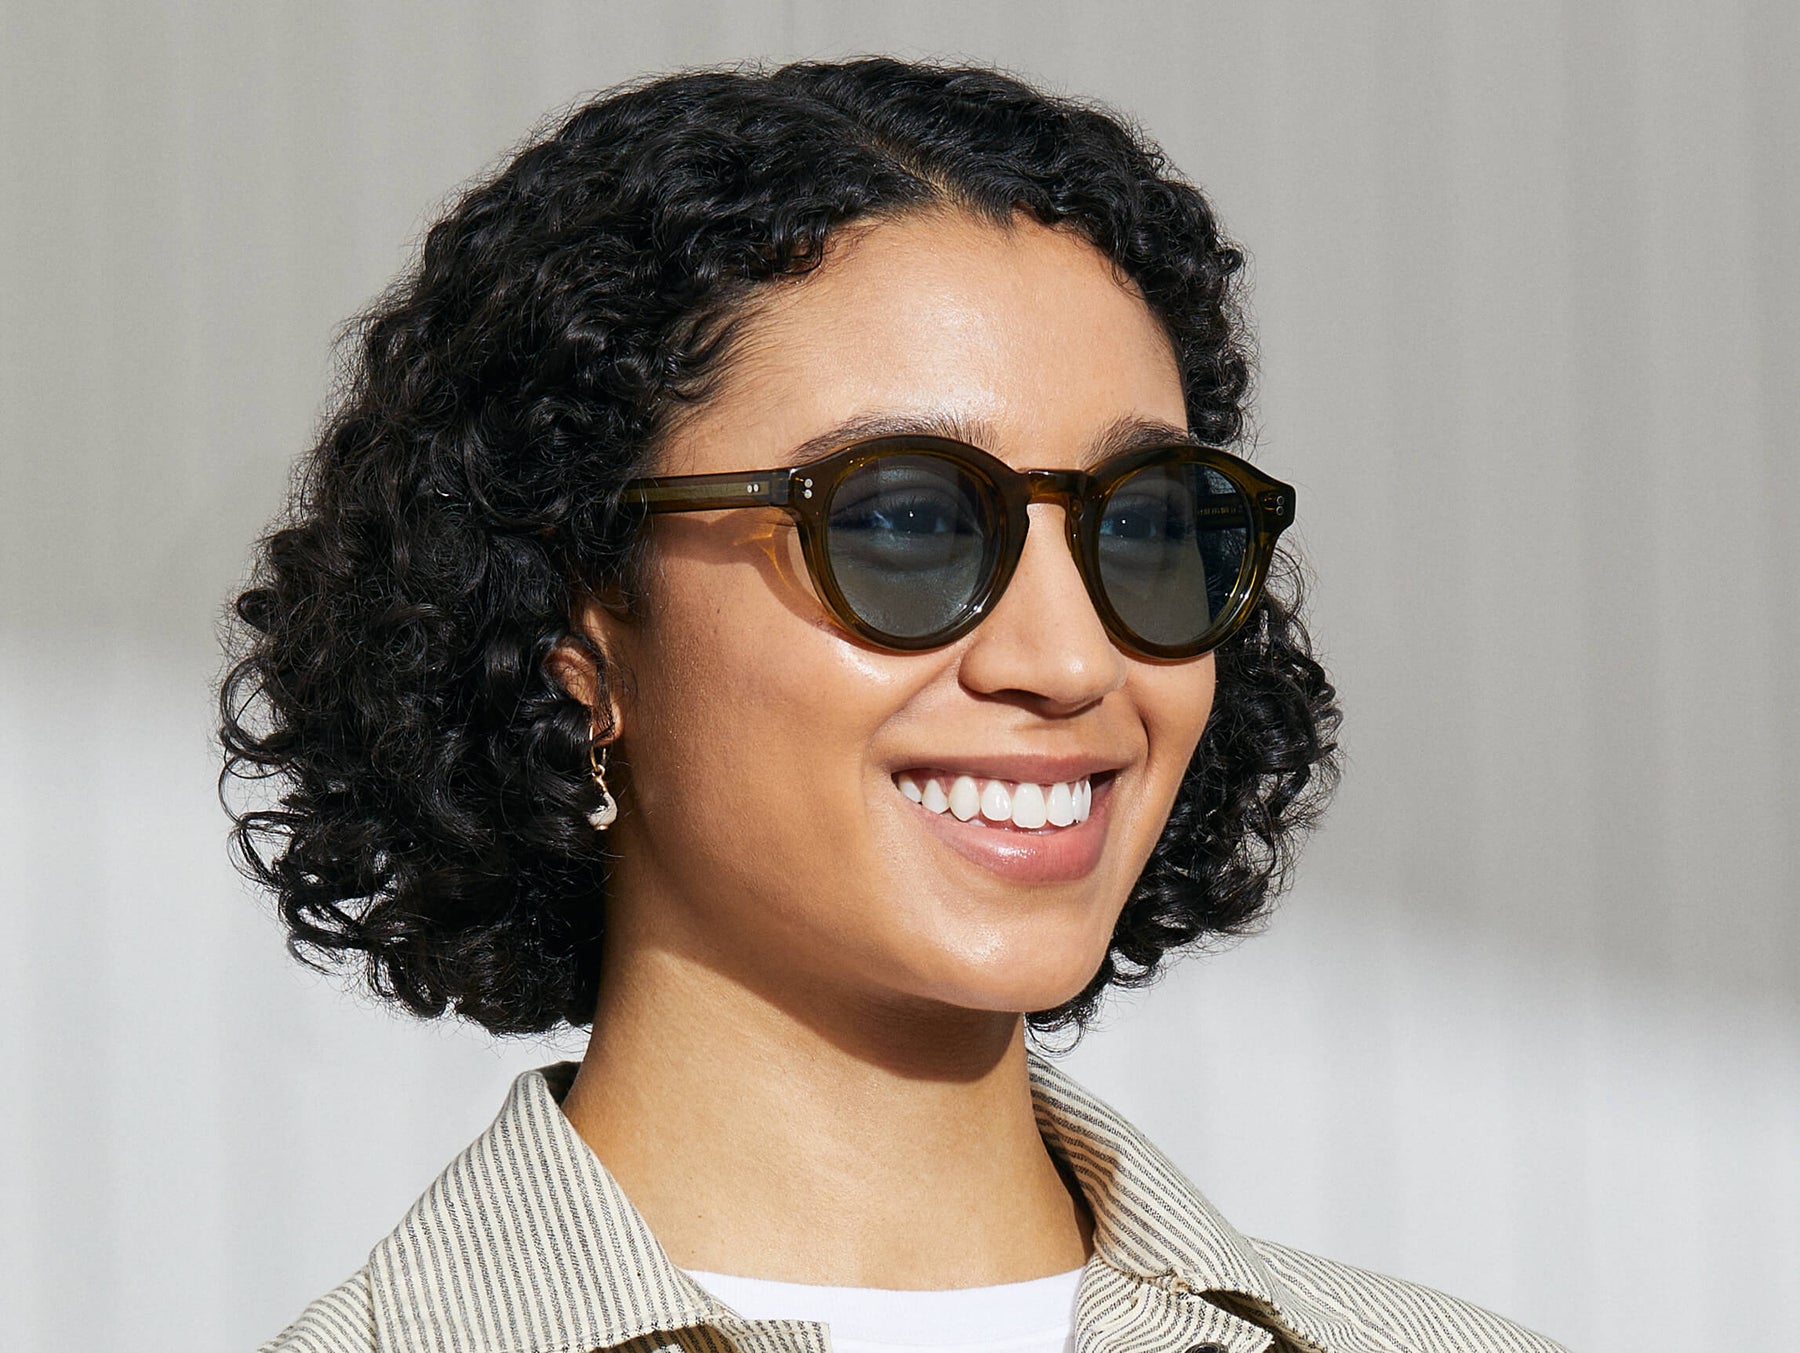 Model is wearing The KEPPE SUN in Olive Brown in size 48 with Mineral Blue Glass Lenses